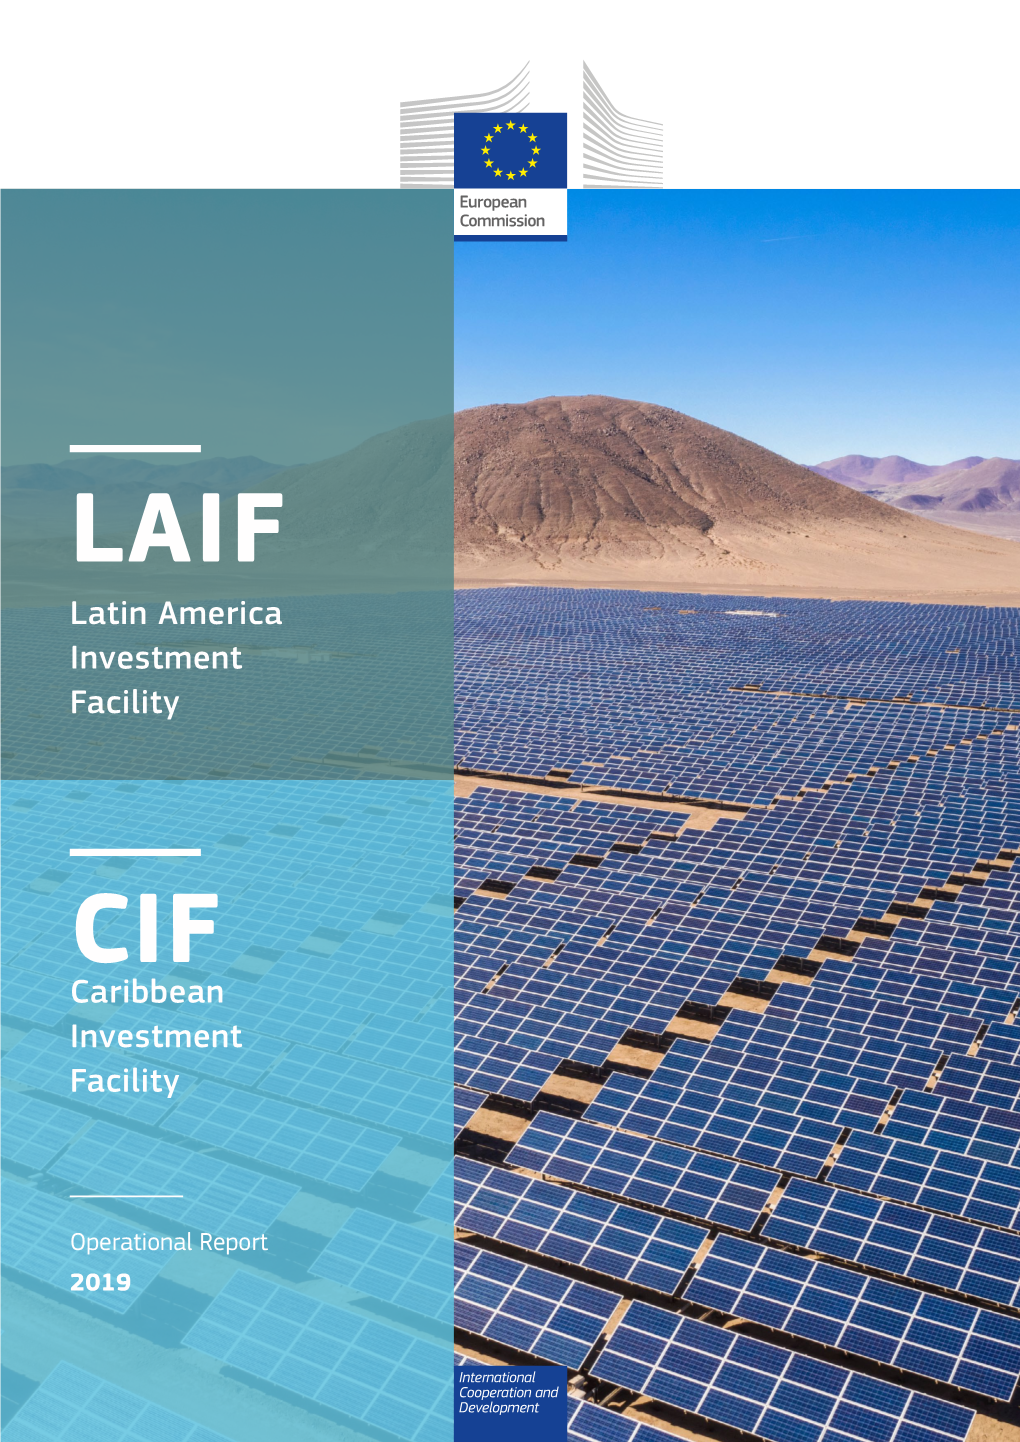 Operational Report 2019. LAIF Latin America Investment Facility CIF